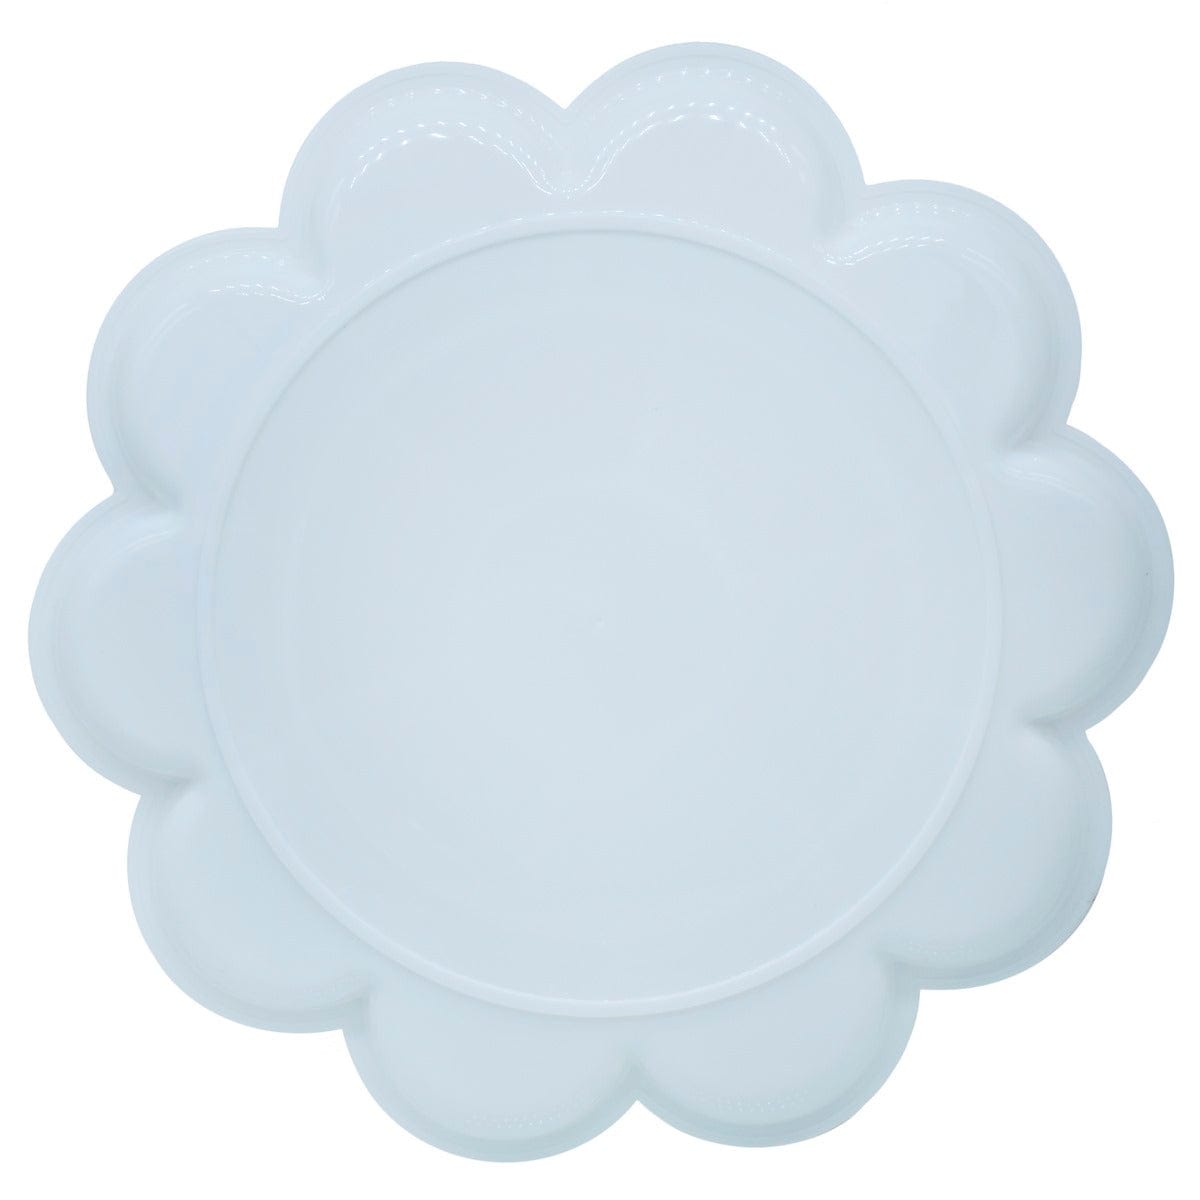 jags-mumbai Artificial Flower Add a Touch of Artistry with Our Round Flower Medium Colour Mixing Plate DS404